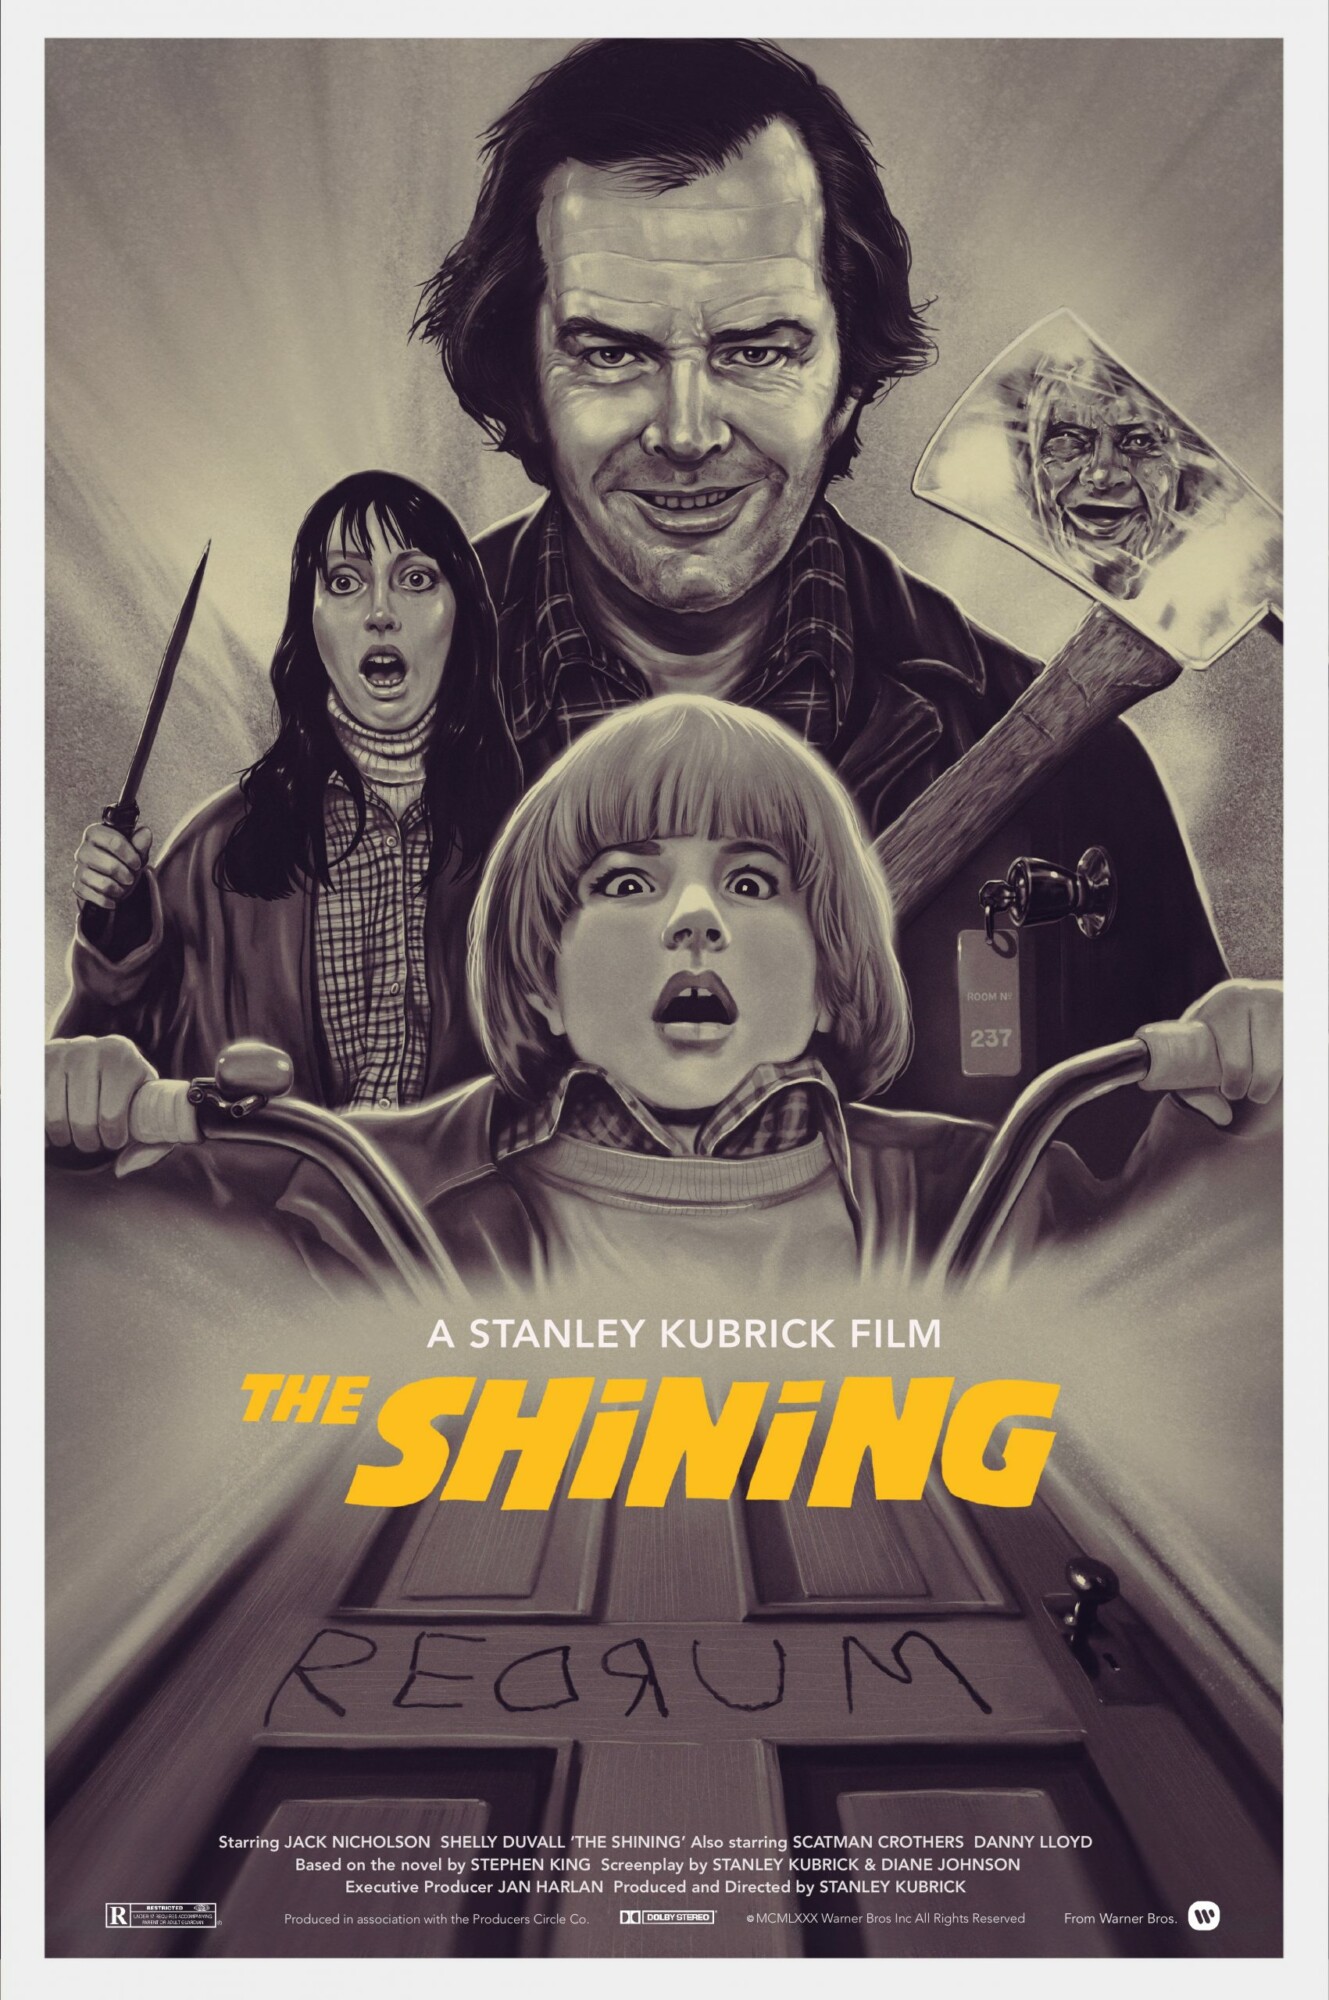 The Shining | Nickchargeart | PosterSpy